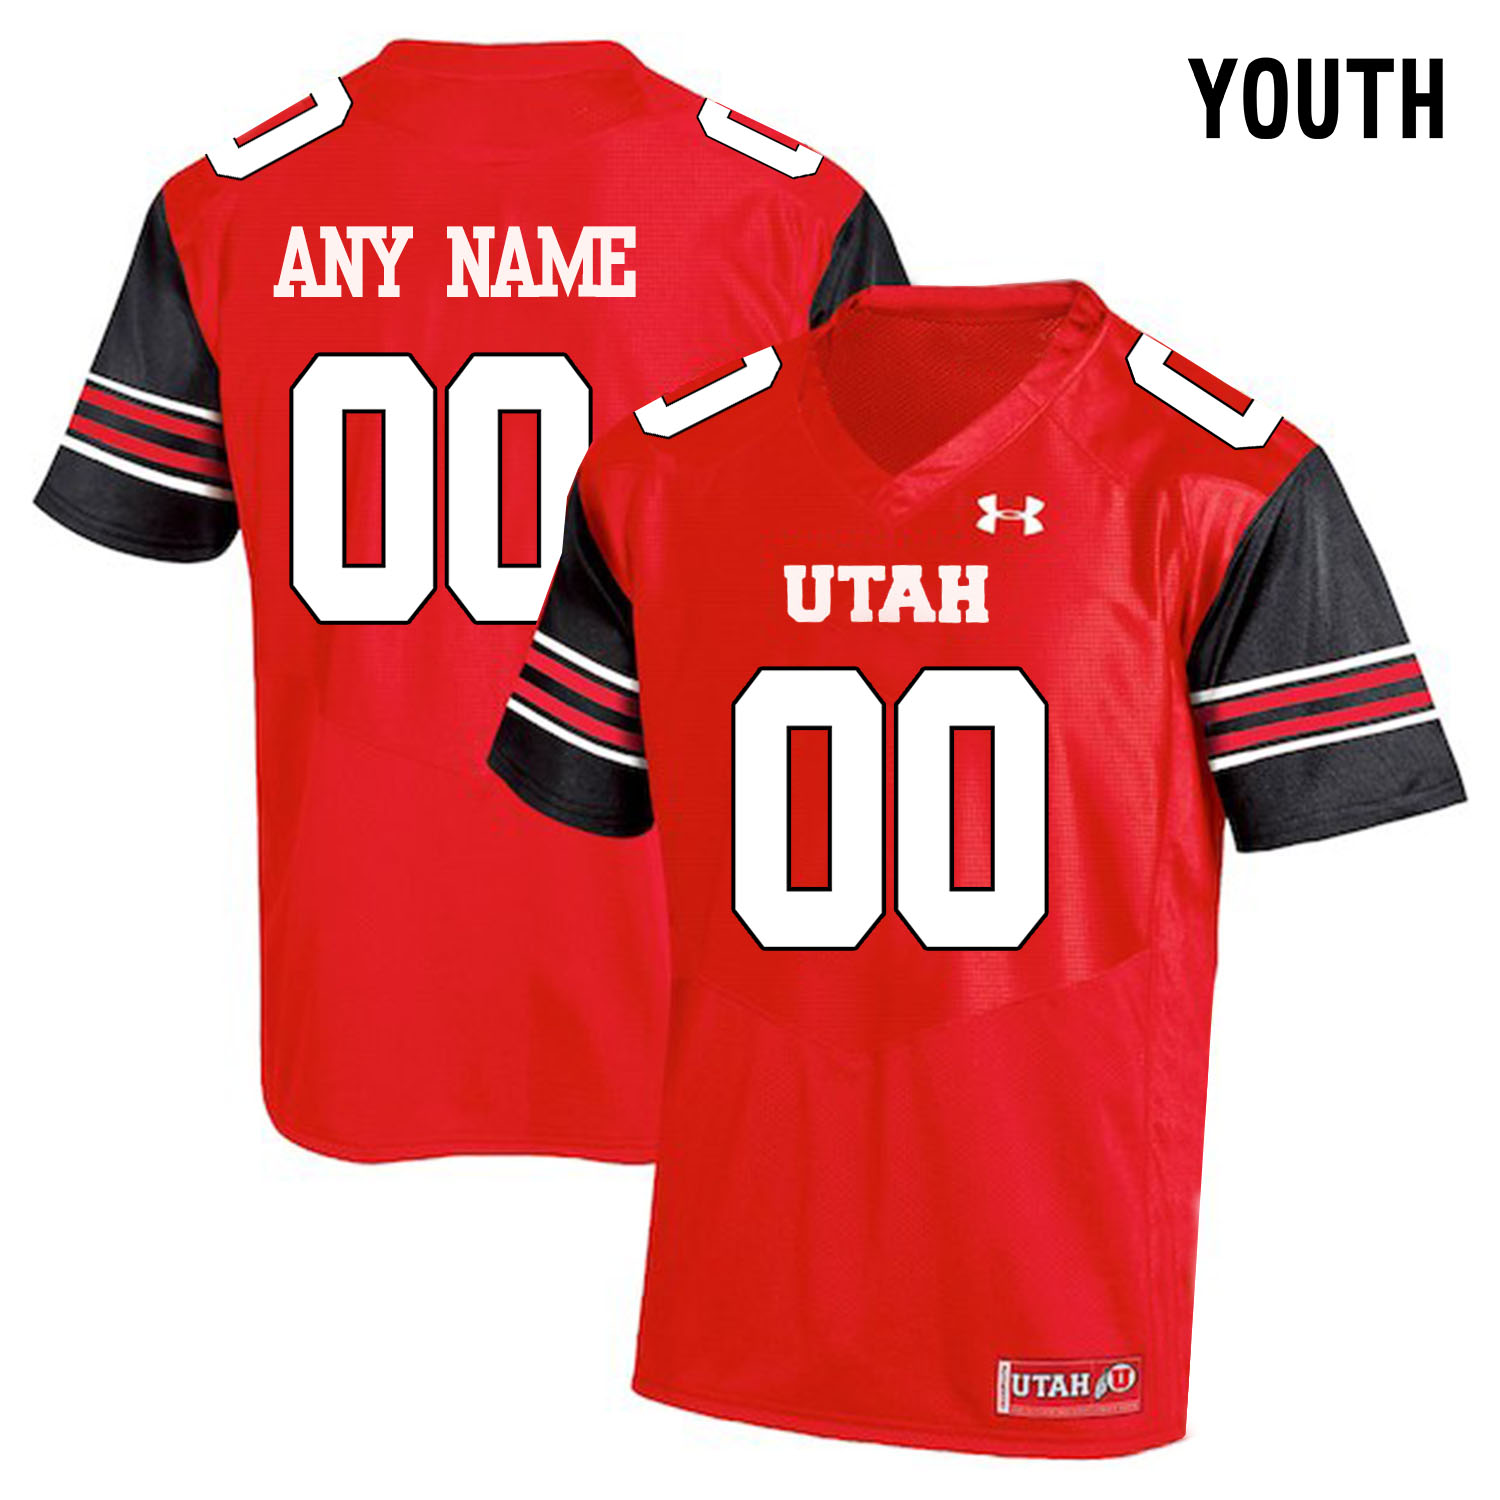 Utah Utes Red Youth's Customized College Football Jersey